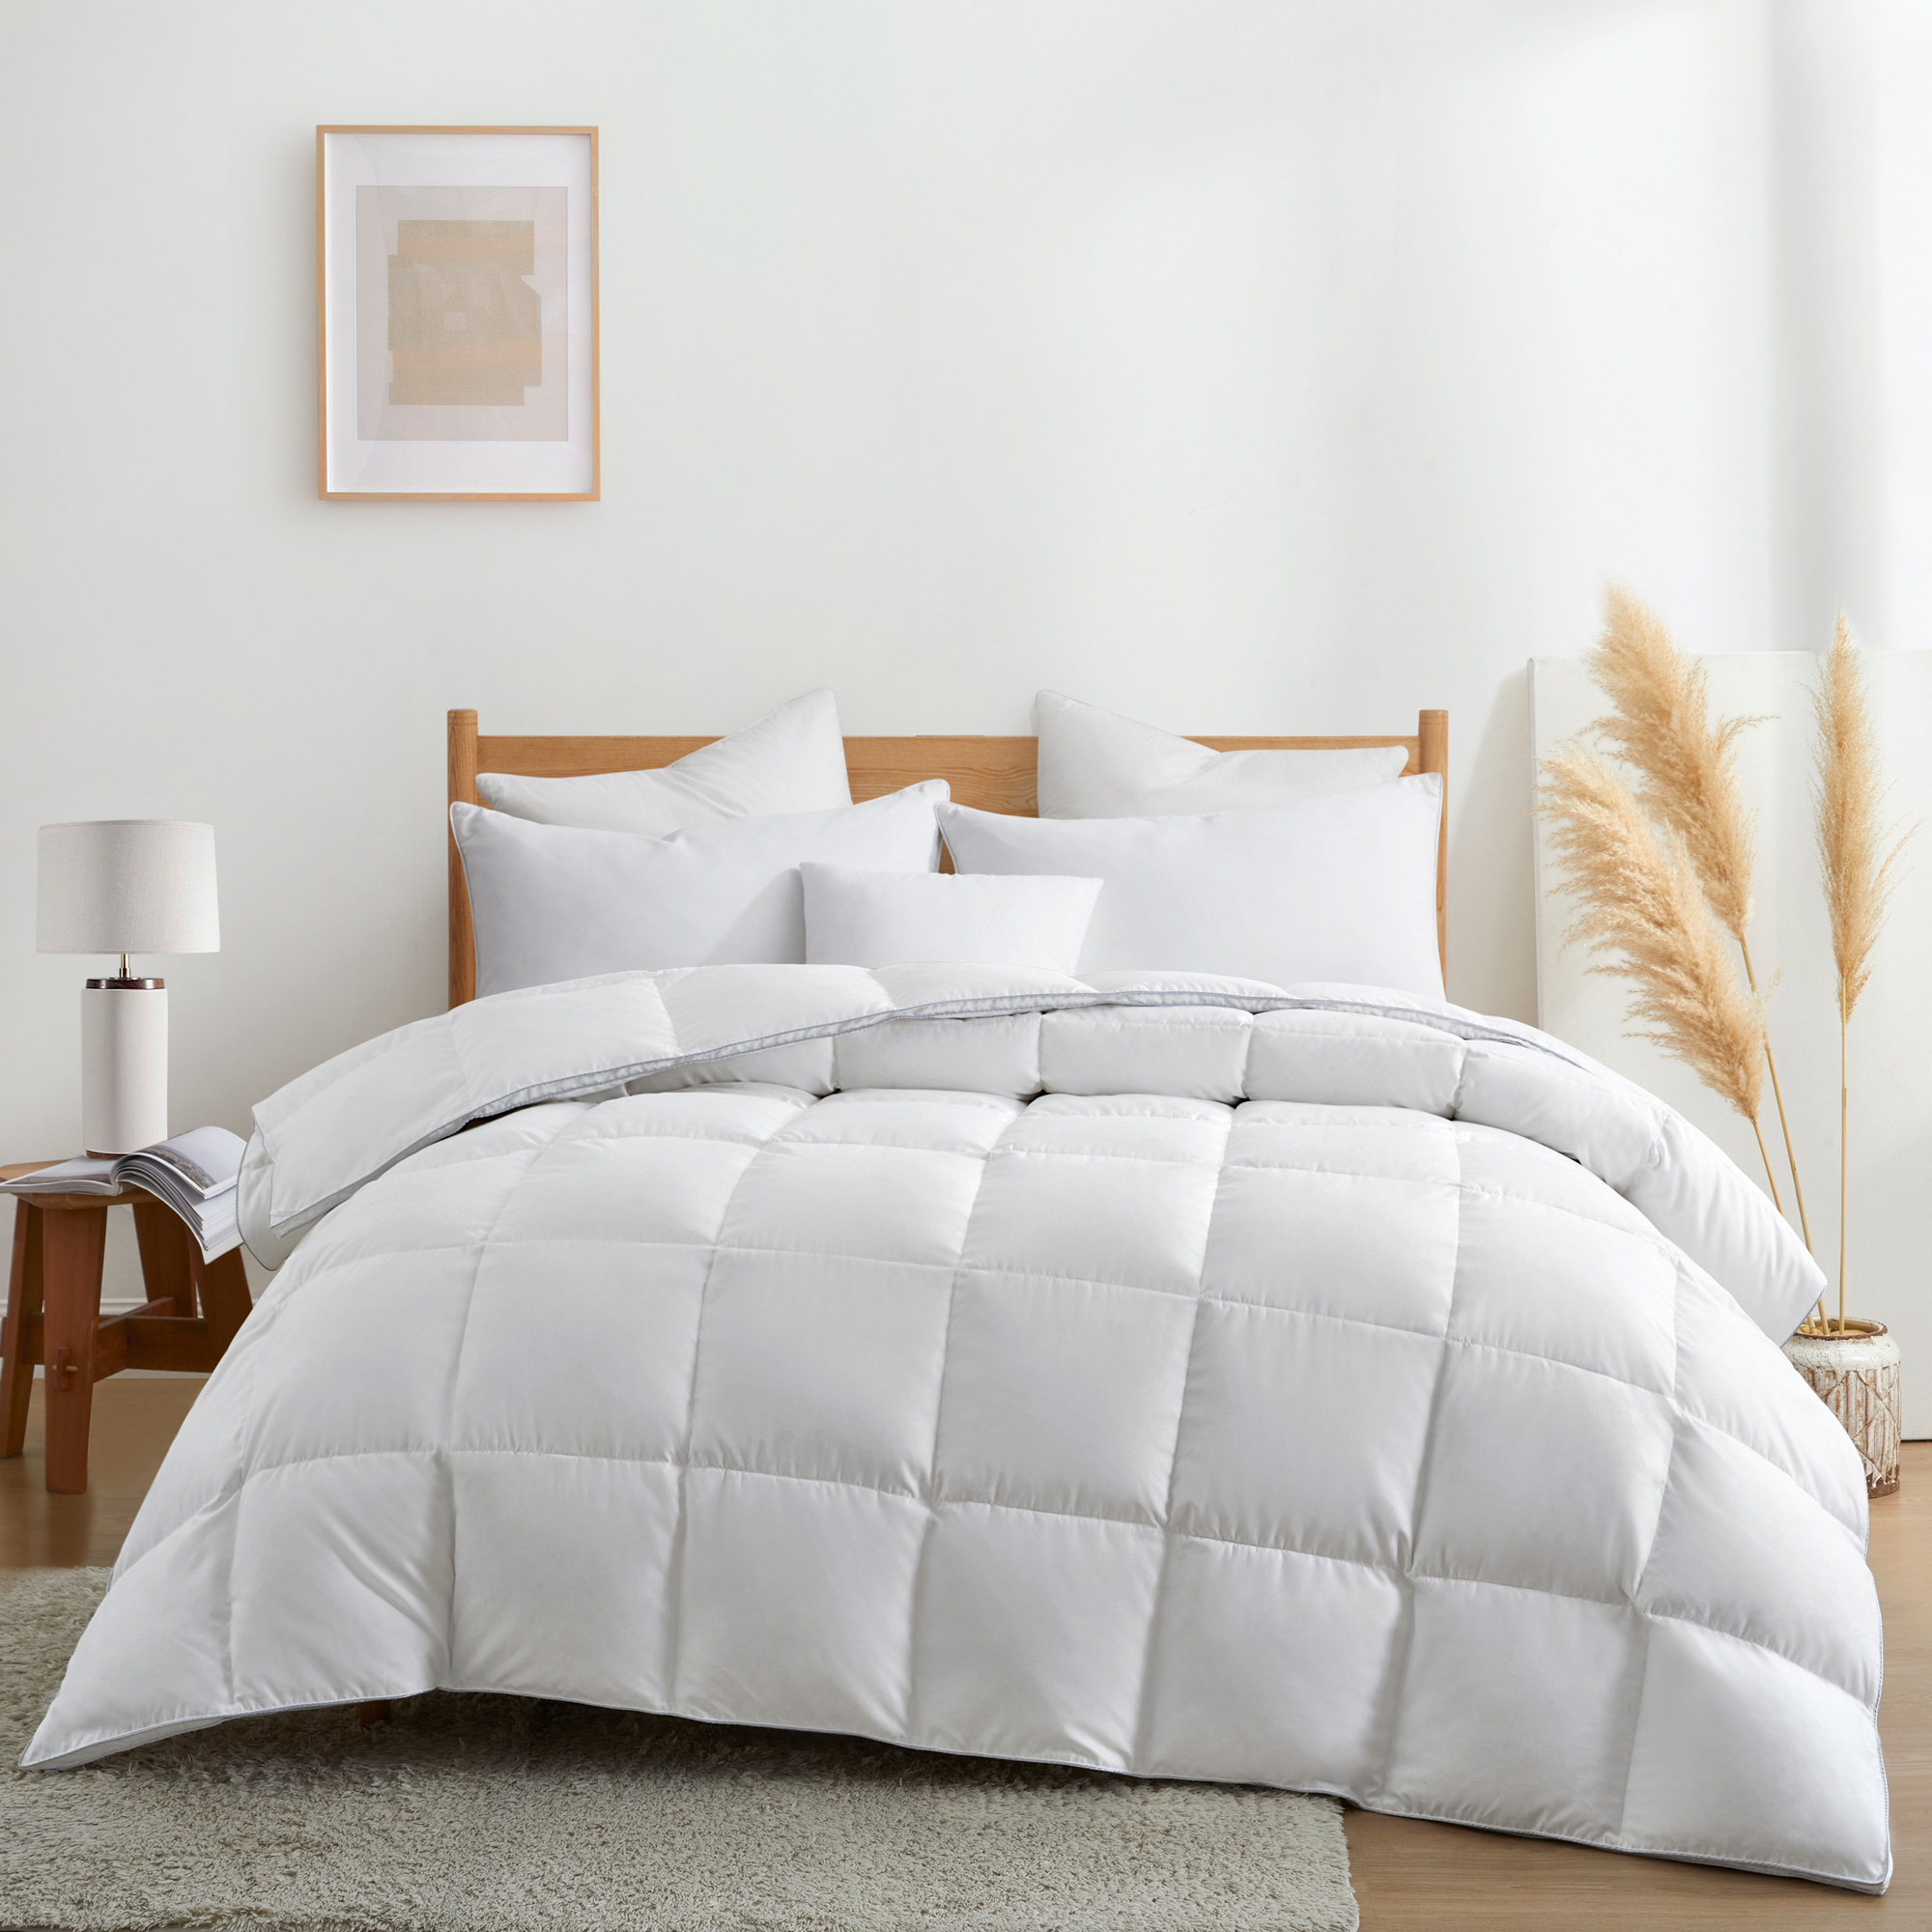 Luxurious Medium Weight White Goose Down Feathers Fiber Comforter, For All-Season Weather - King